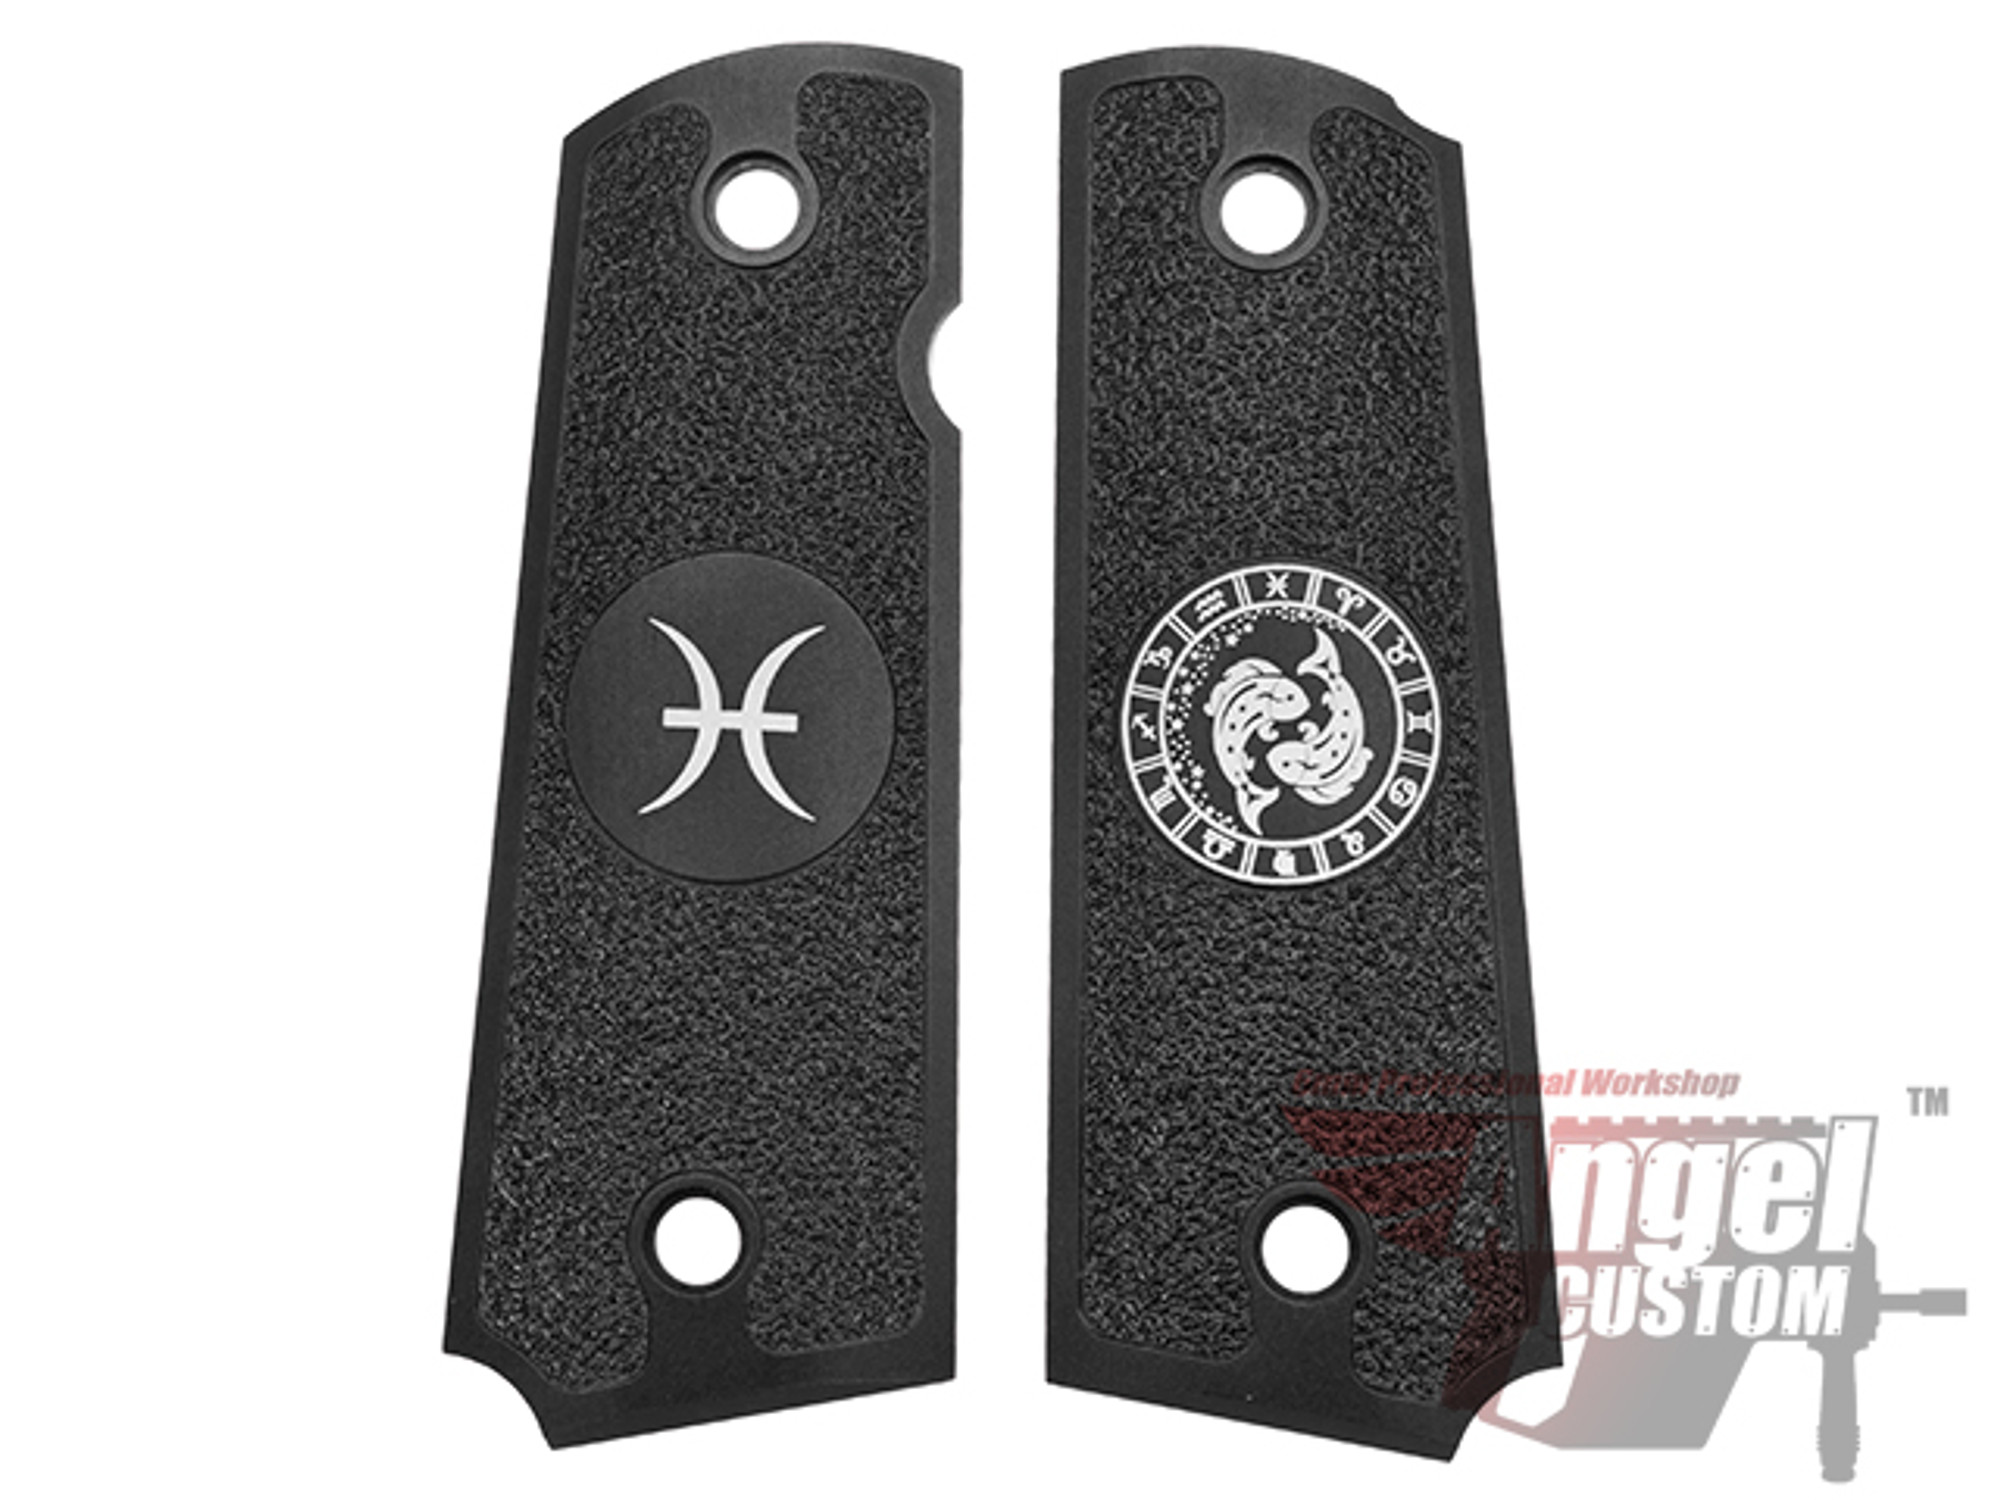 Angel Custom CNC Machined Tac-Glove "Zodiac" Grips for WE-Tech 1911 Series Airsoft Pistols - Black (Sign: Pisces)